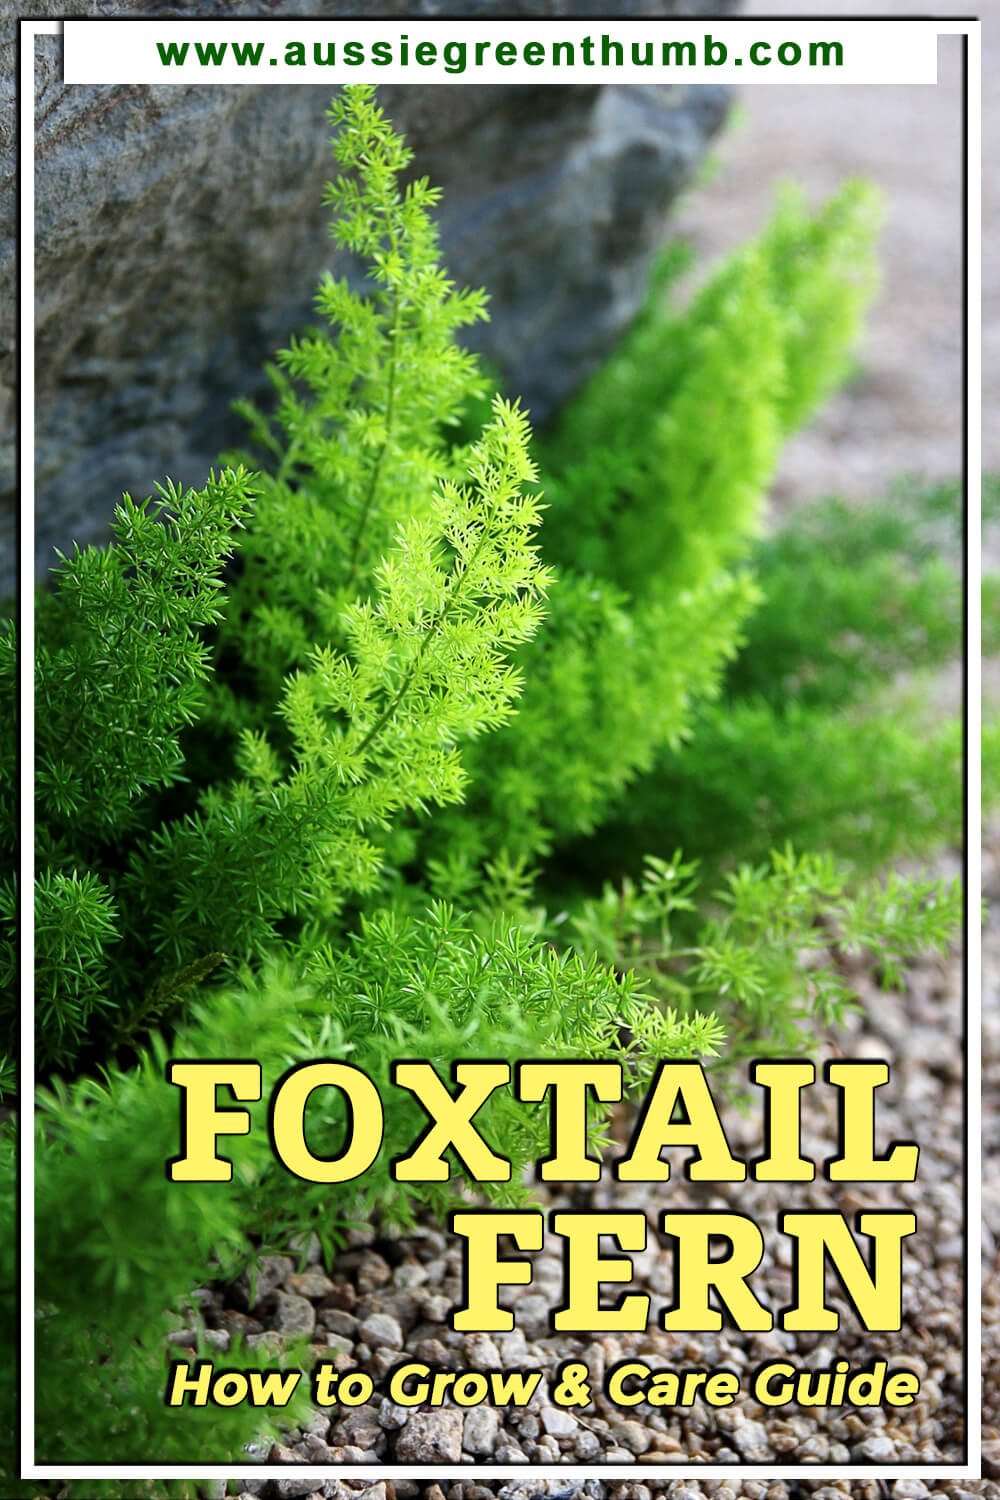 Foxtail Fern | How to Grow & Care Guide